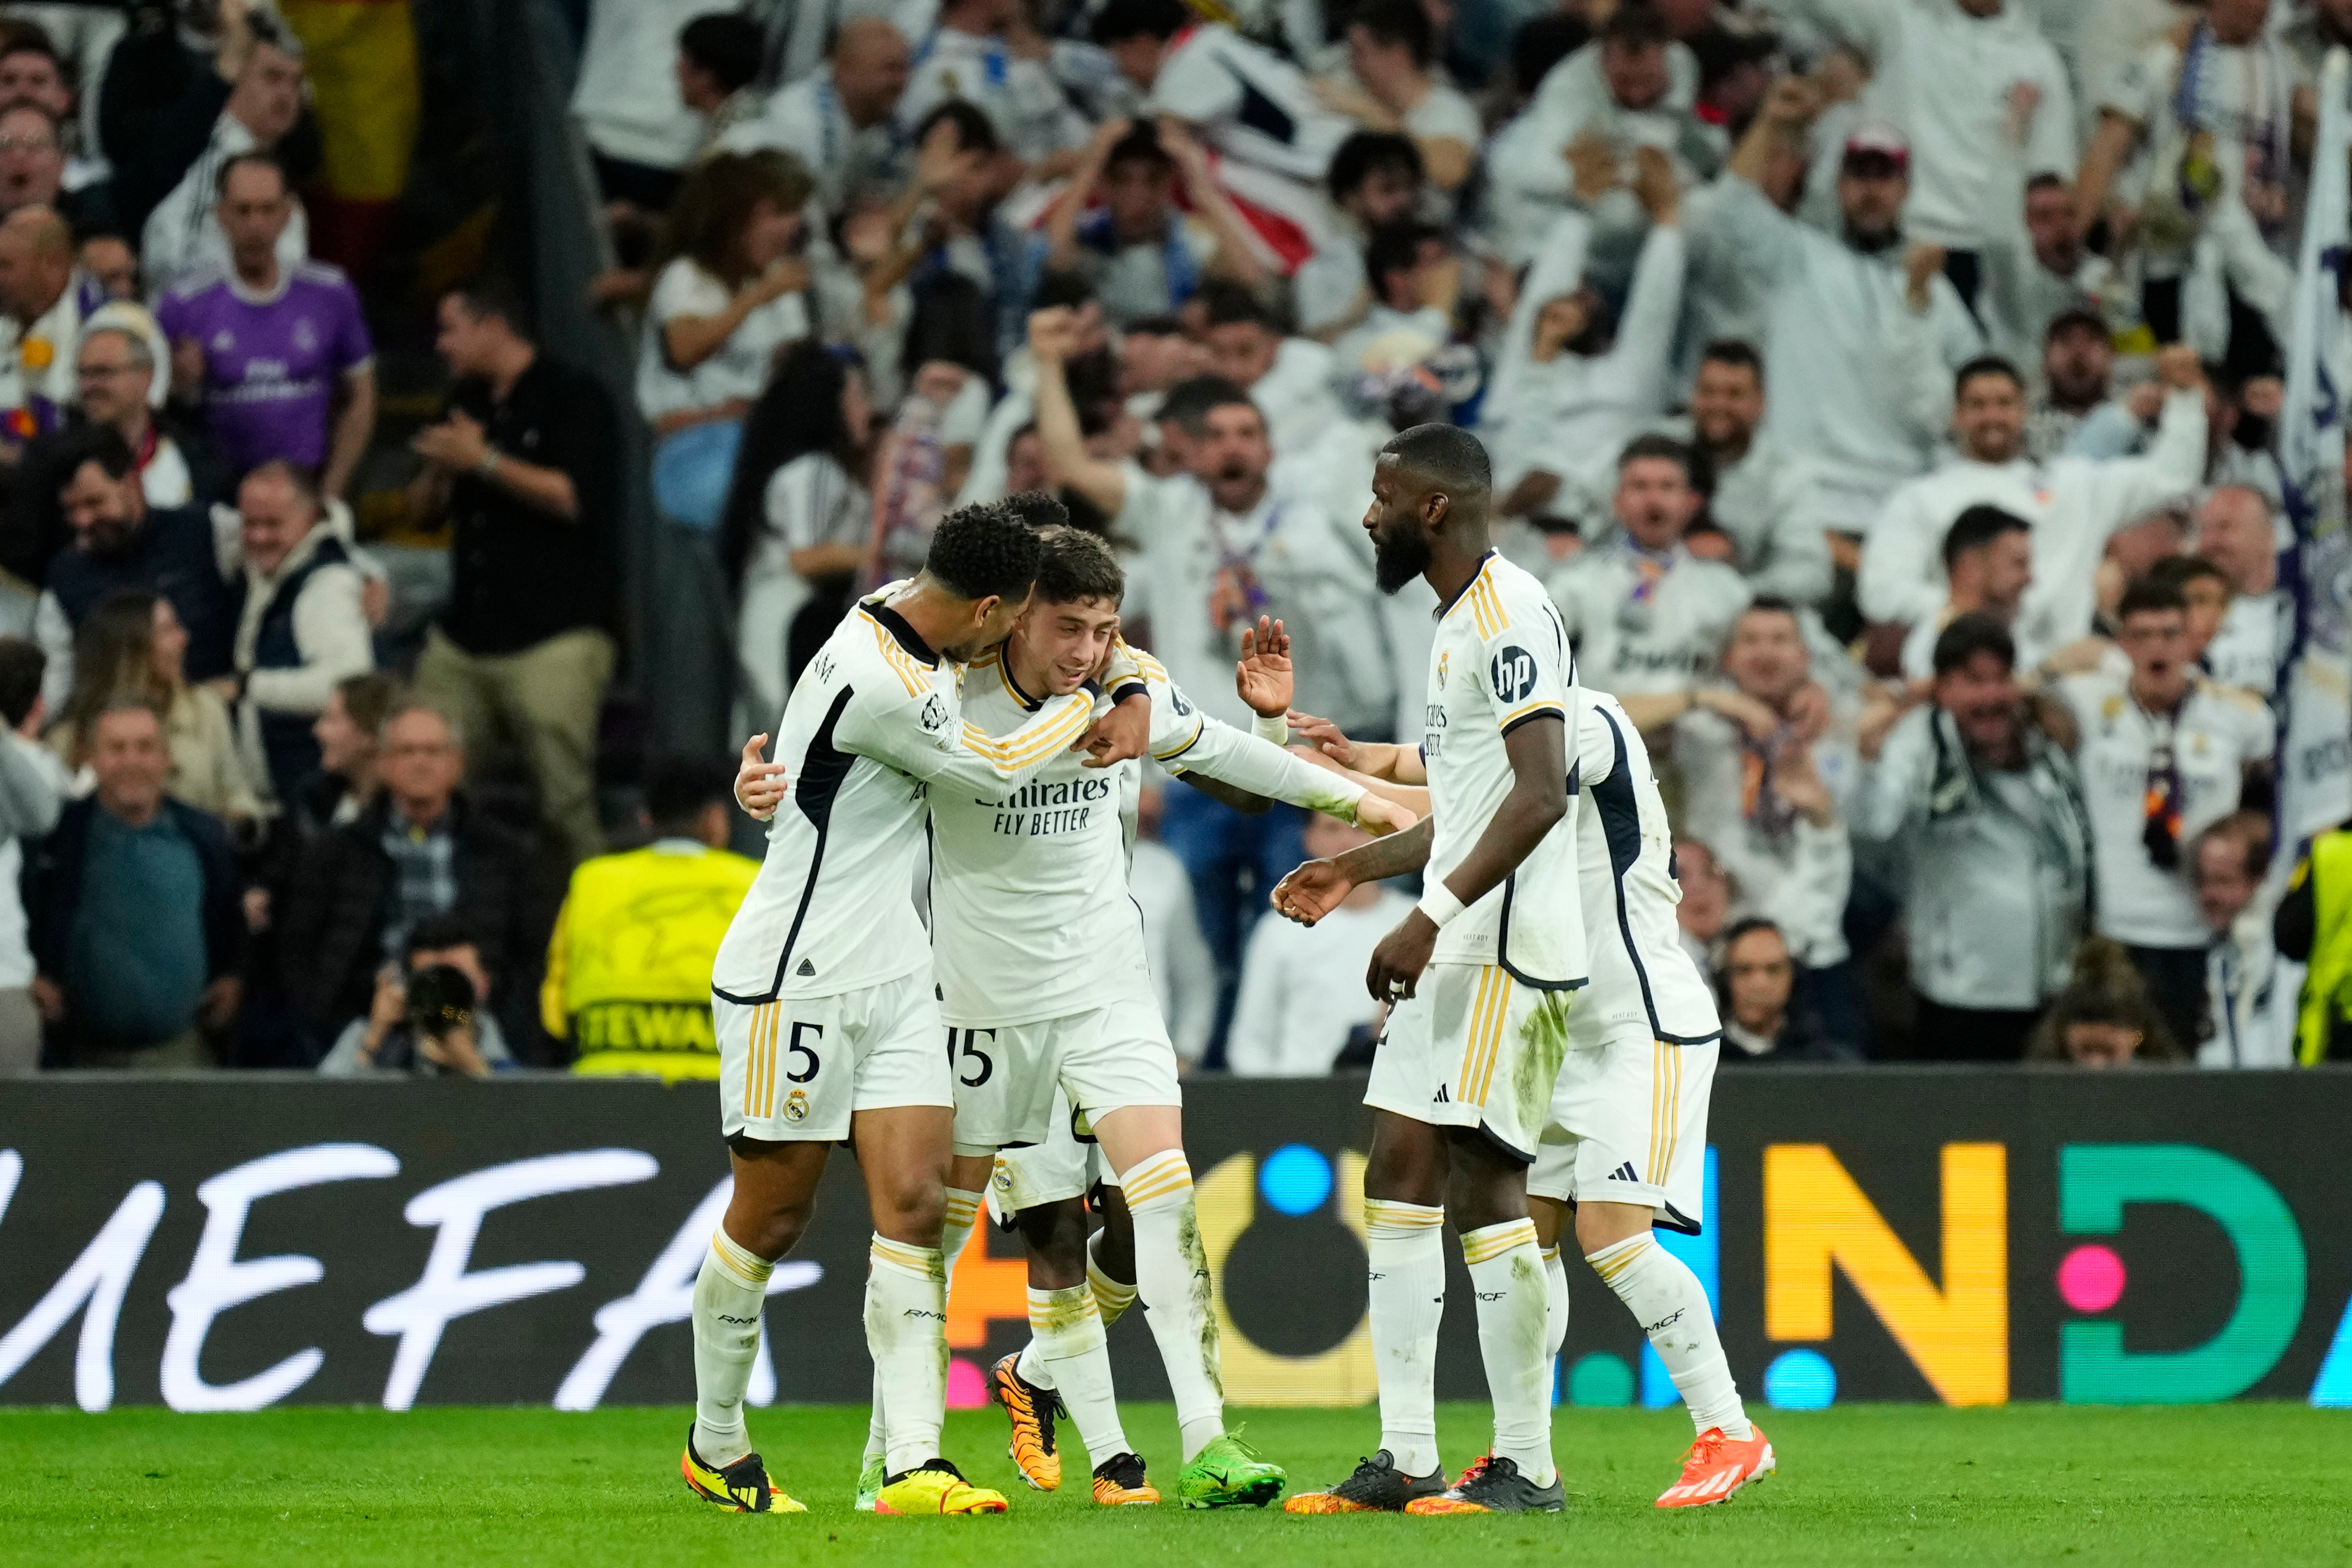 Real Madrid can produce moments of brilliance